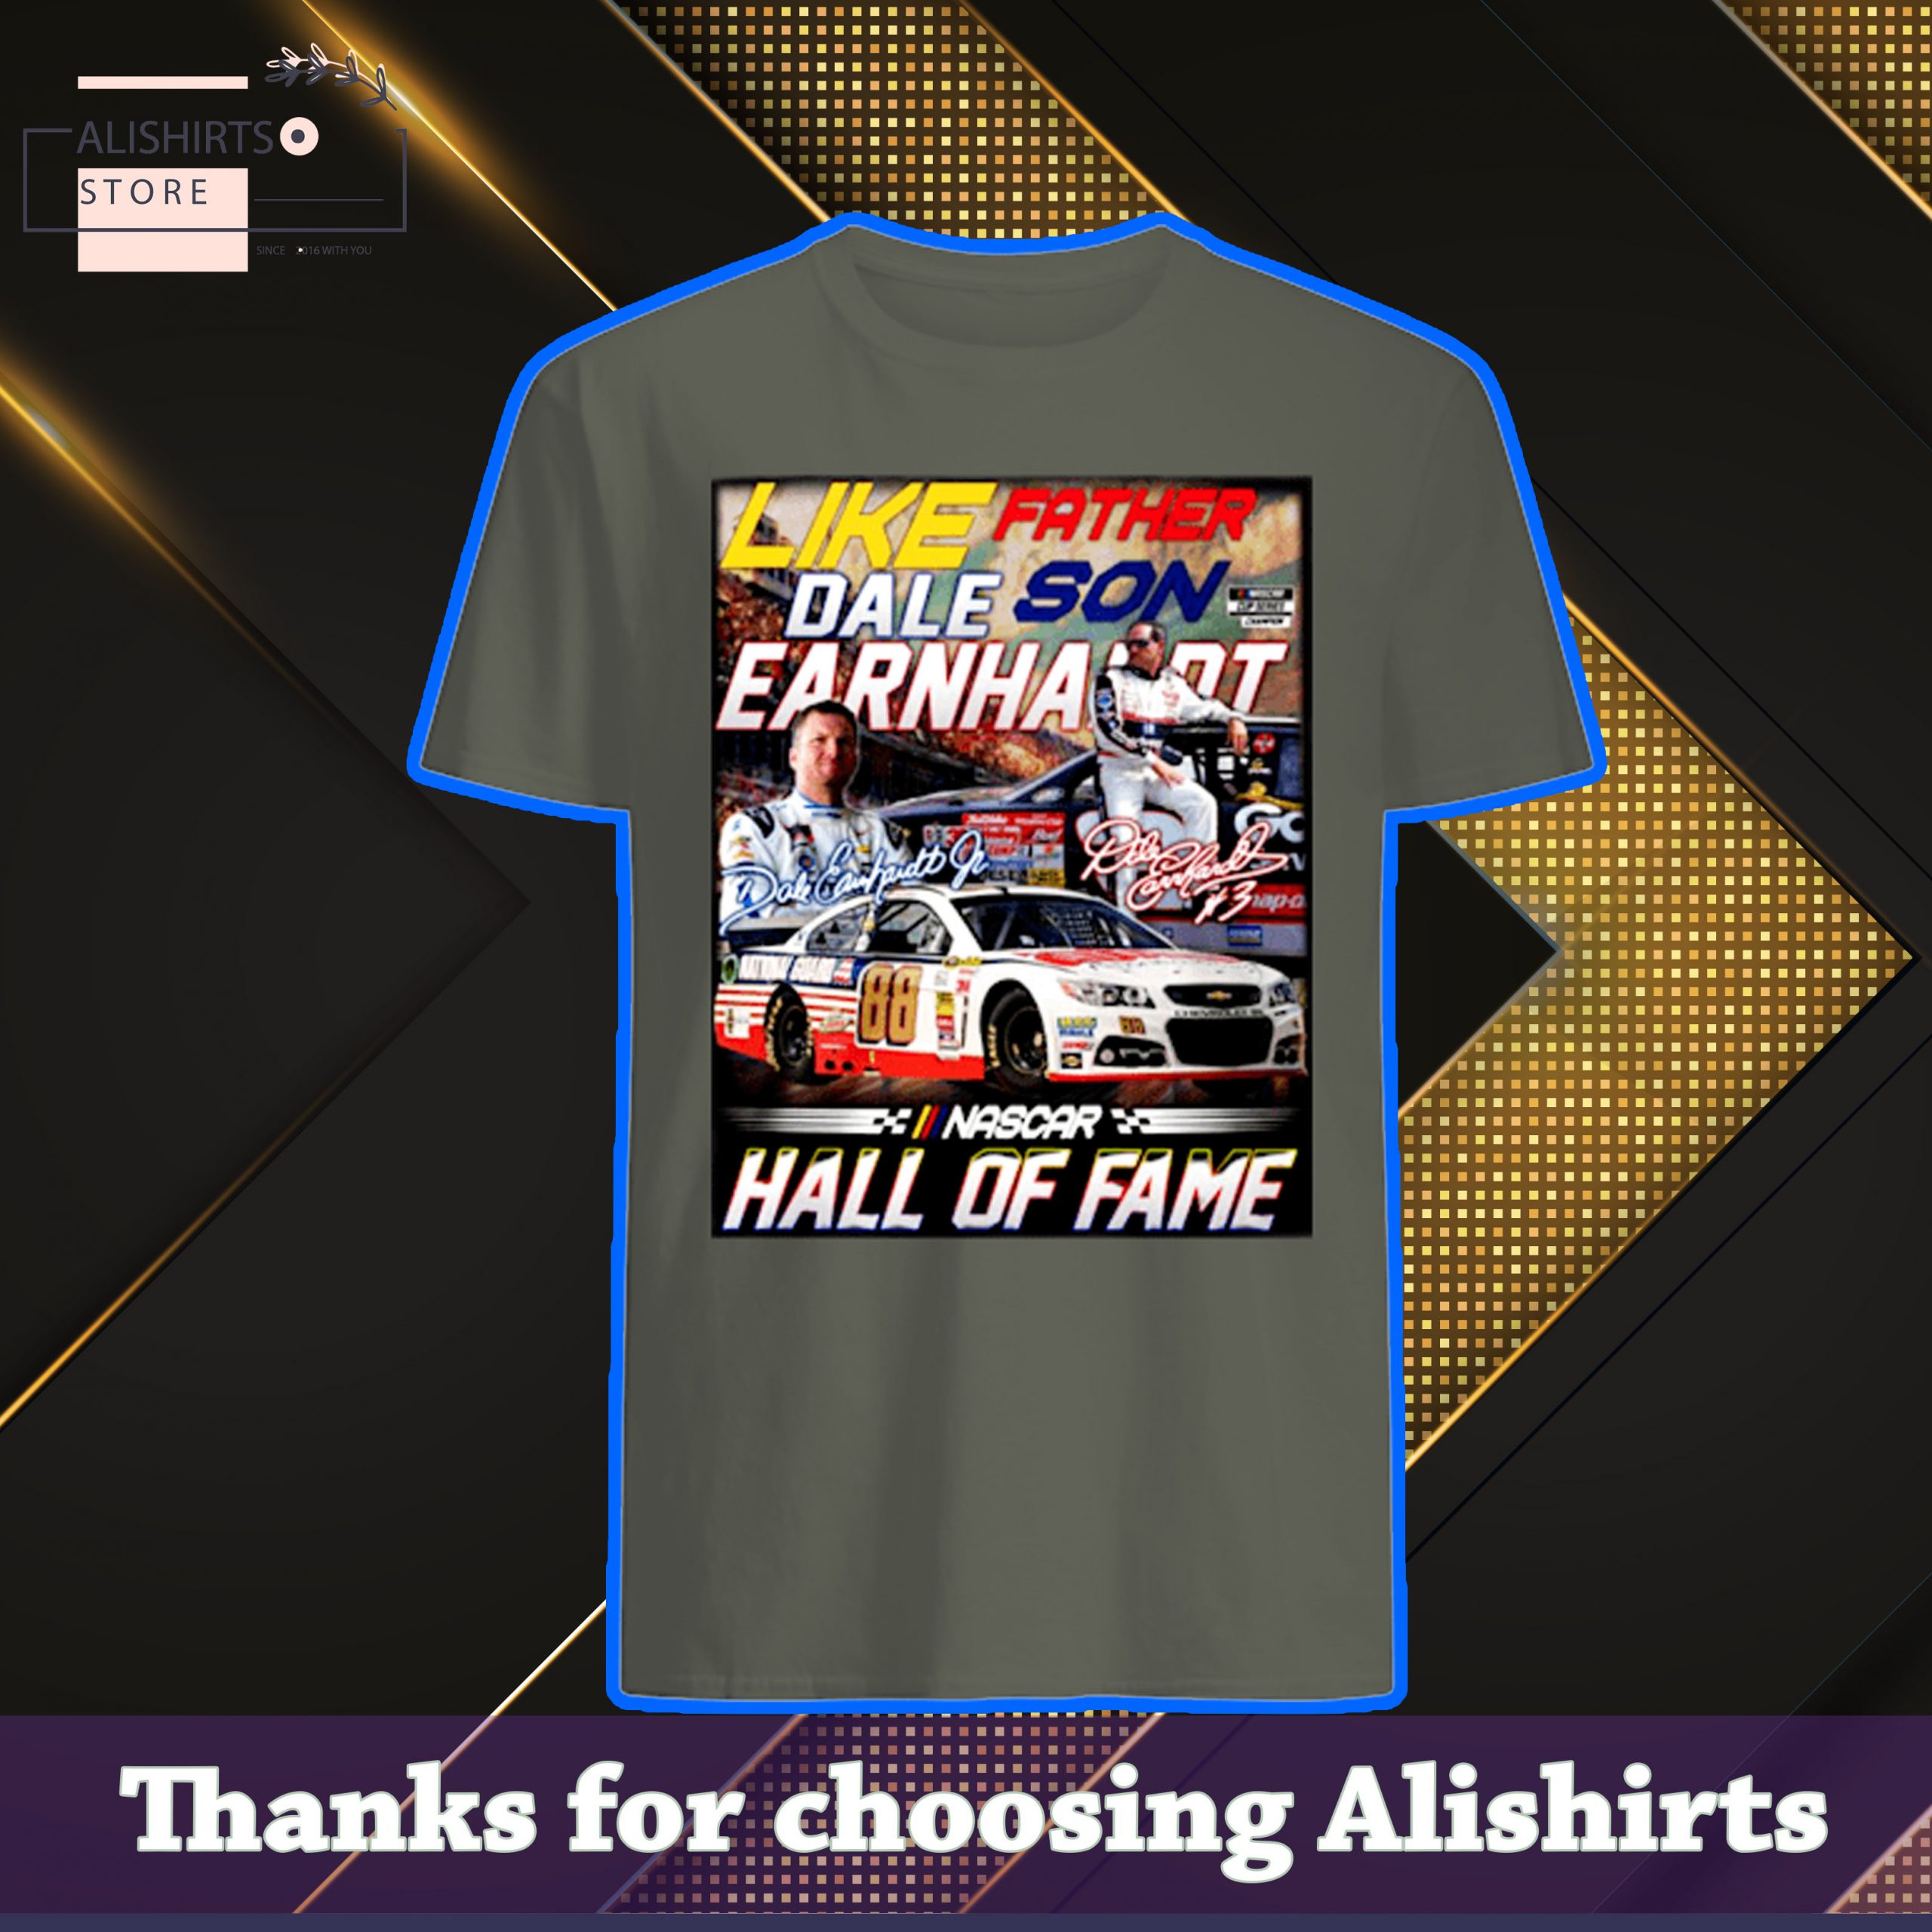 Like father dale son earnhardt Nascar hall of fame signatures shirt